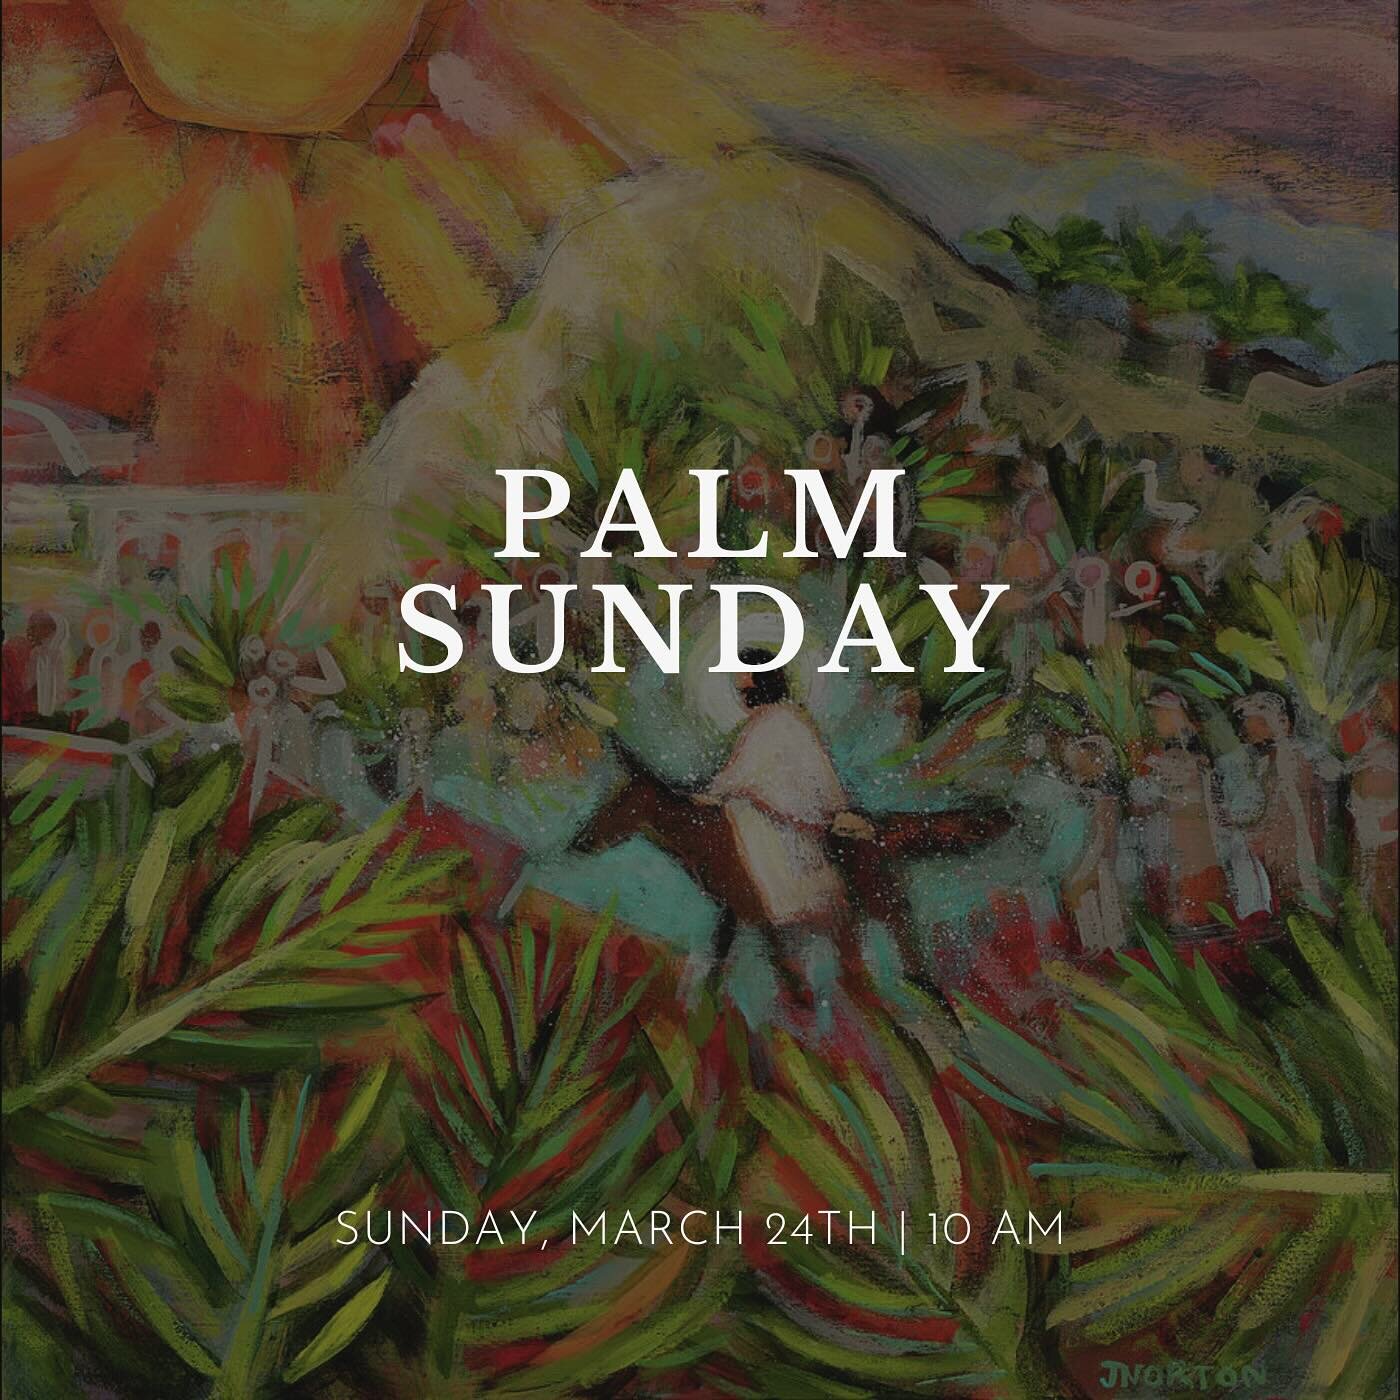 Next Sunday, March 24th is Palm Sunday. On Palm Sunday, we reflect upon Jesus&rsquo; procession into Jerusalem as he arrives upon a colt and is celebrated with waving palm leaves. We join together in a procession around the church on Palm Sunday sing